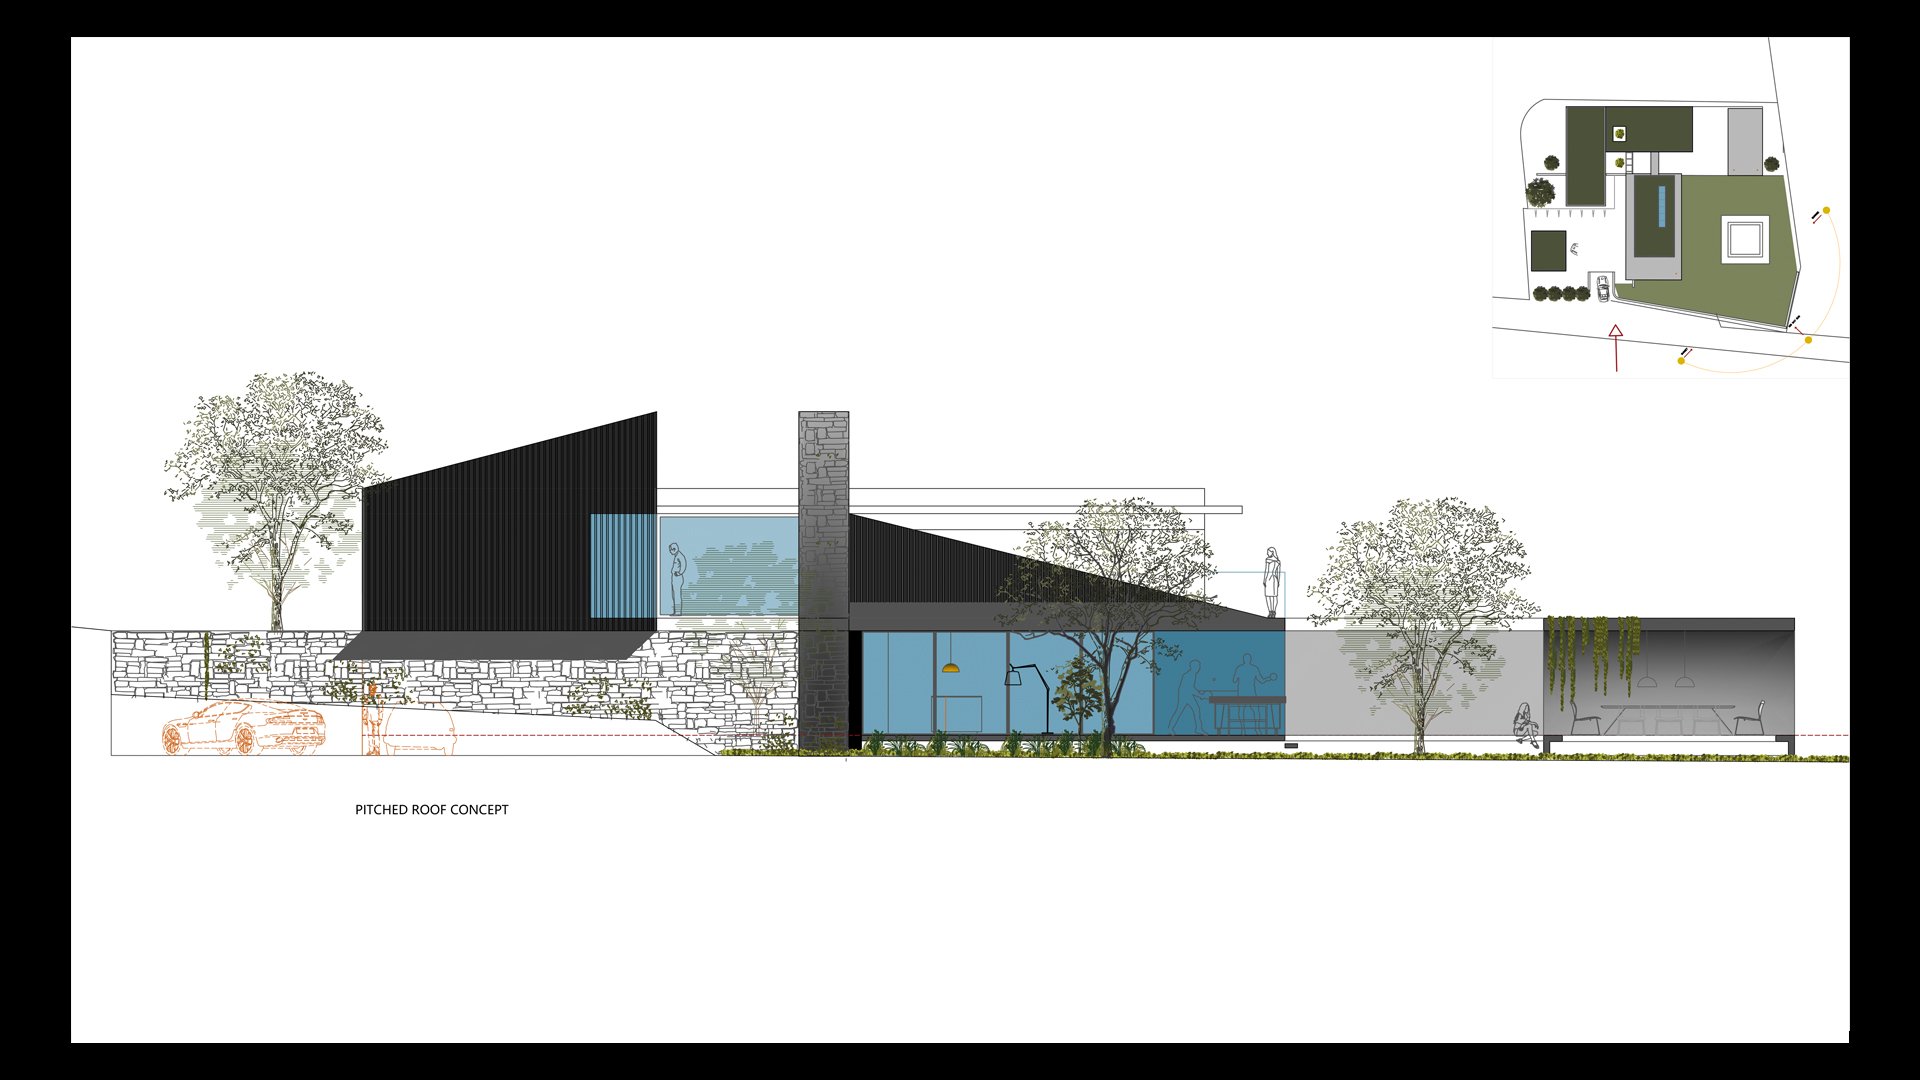  Pitched roof concept elevation  